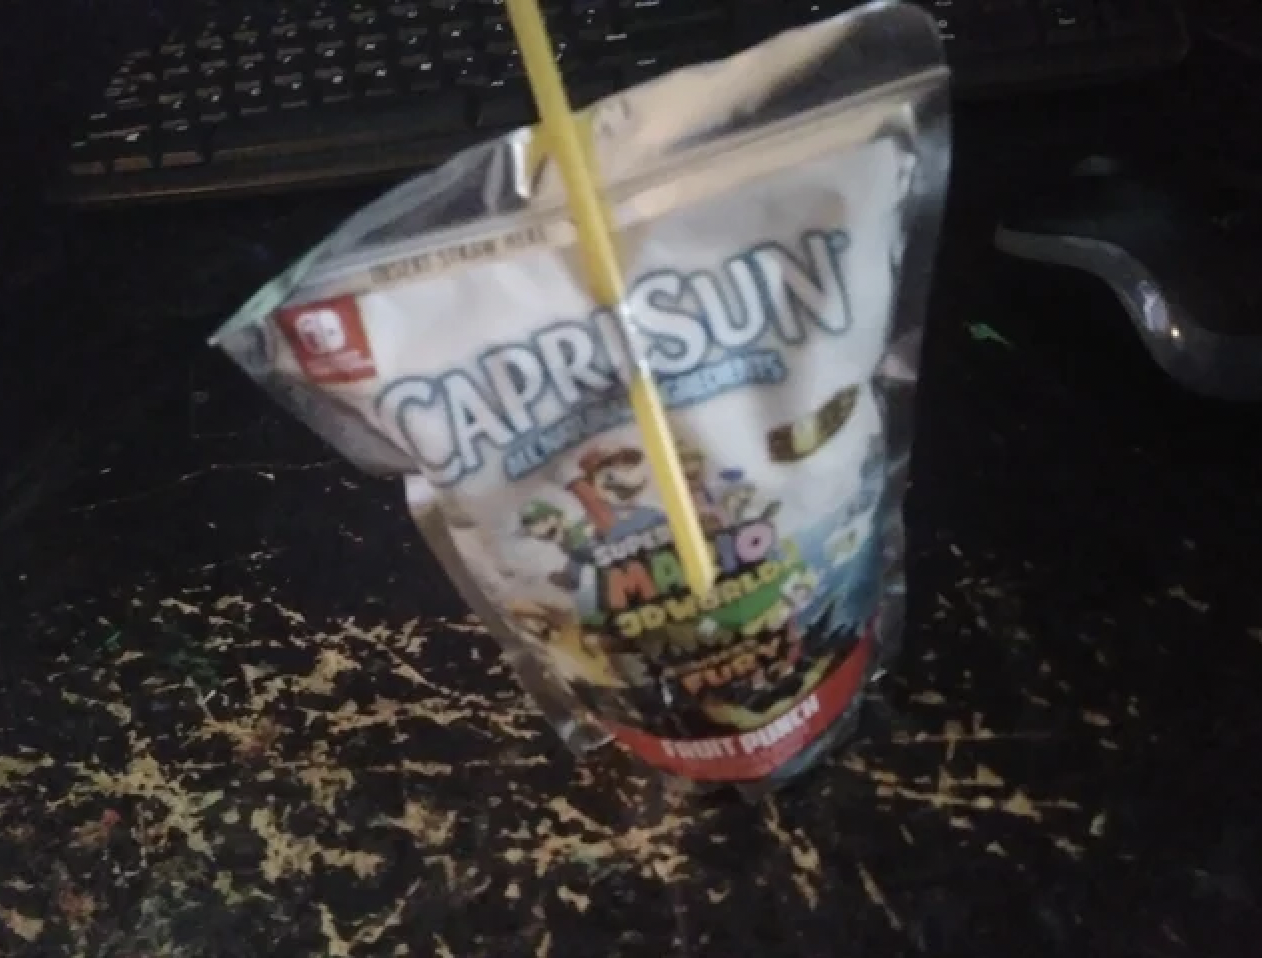 Mildly Annoying Pictures - drink - Caprisun Supe Ma 3D More Ge Punch